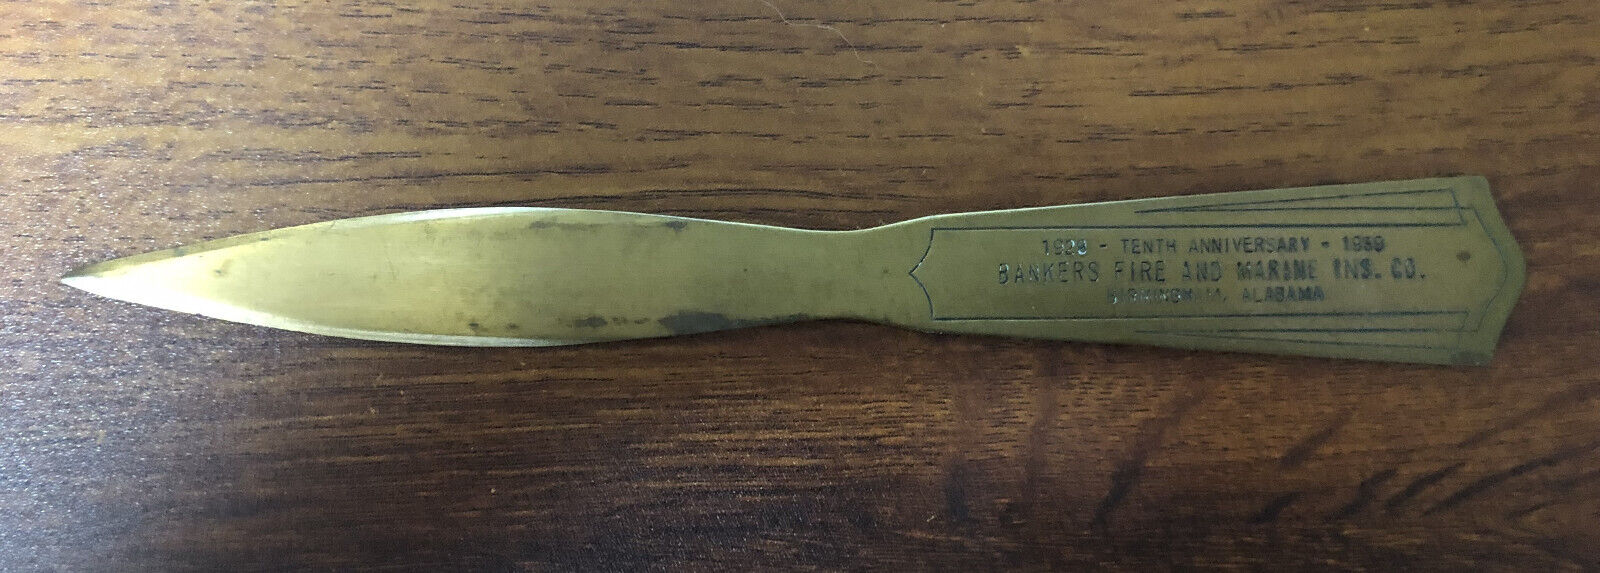 Antique Bankers Fire And Marine Ins. Co. Letter Opener - 1939